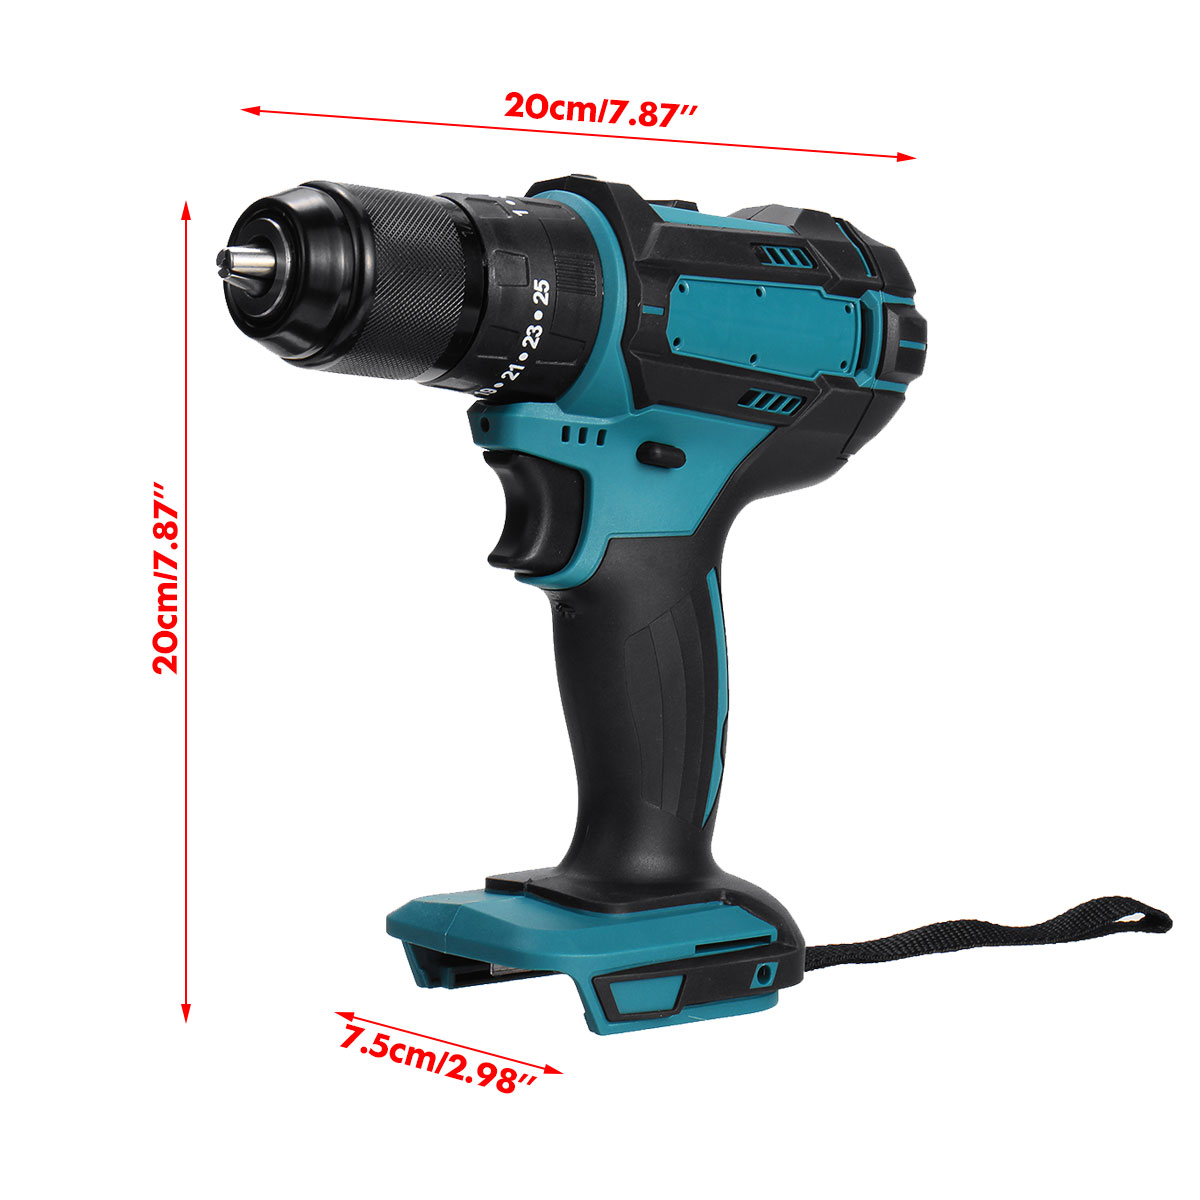 Wolike-13mm-800W-Cordless-Electirc-Impact-Drill-Driver-253-Torque-Electric-Drill-Screwdriver-1880979-12